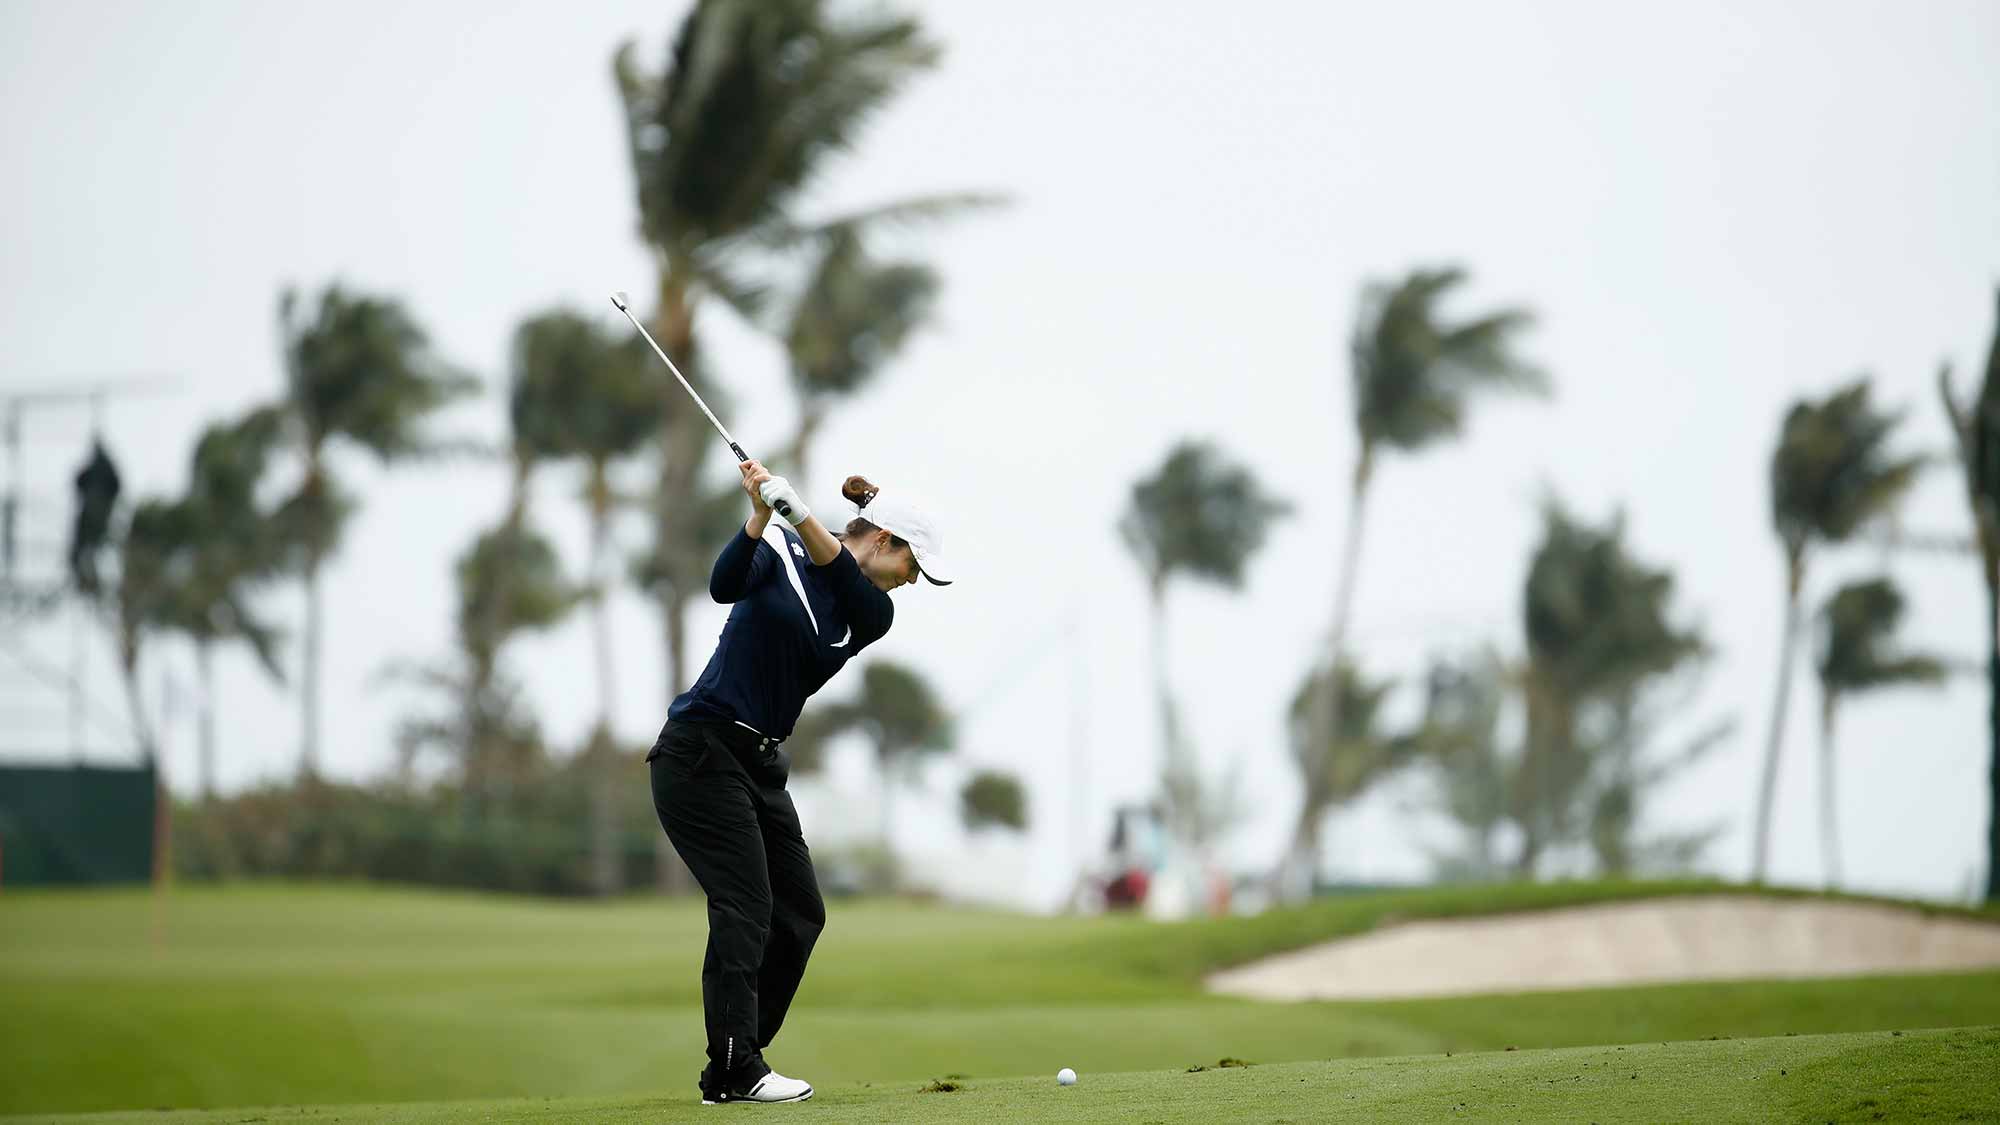 Beatriz Recari of Spain hits her second shot on the 8th hole during the first round of the Pure Silk Bahamas LPGA Classic